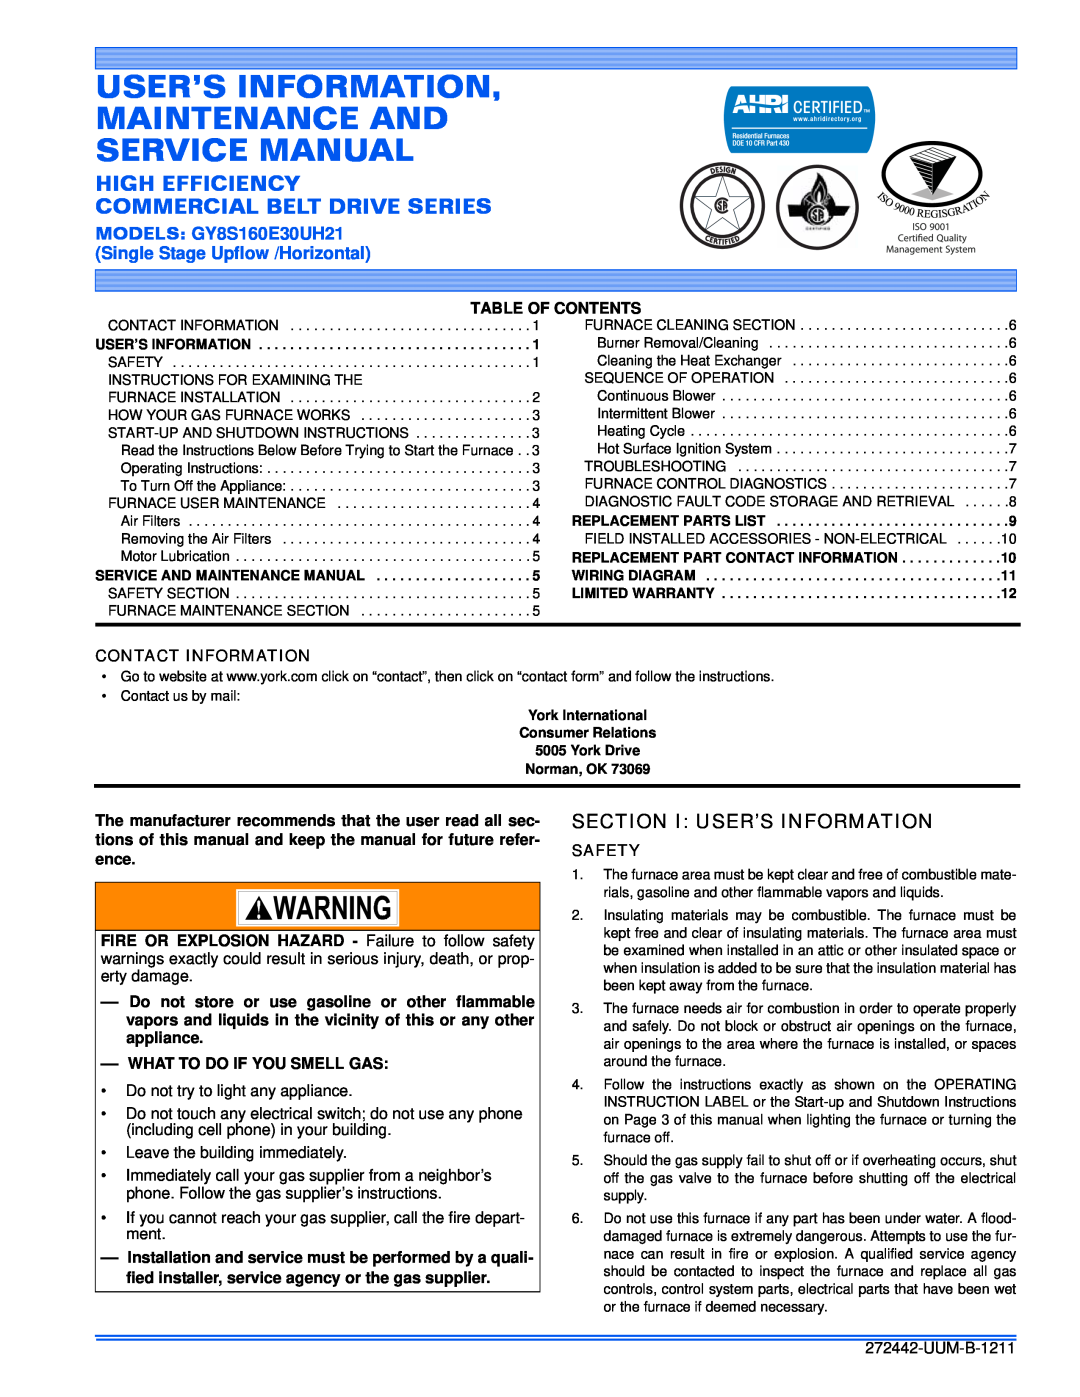 York GY8S160E30UH21 service manual Section I User’S Information, Table Of Contents, Contact Information, Safety 